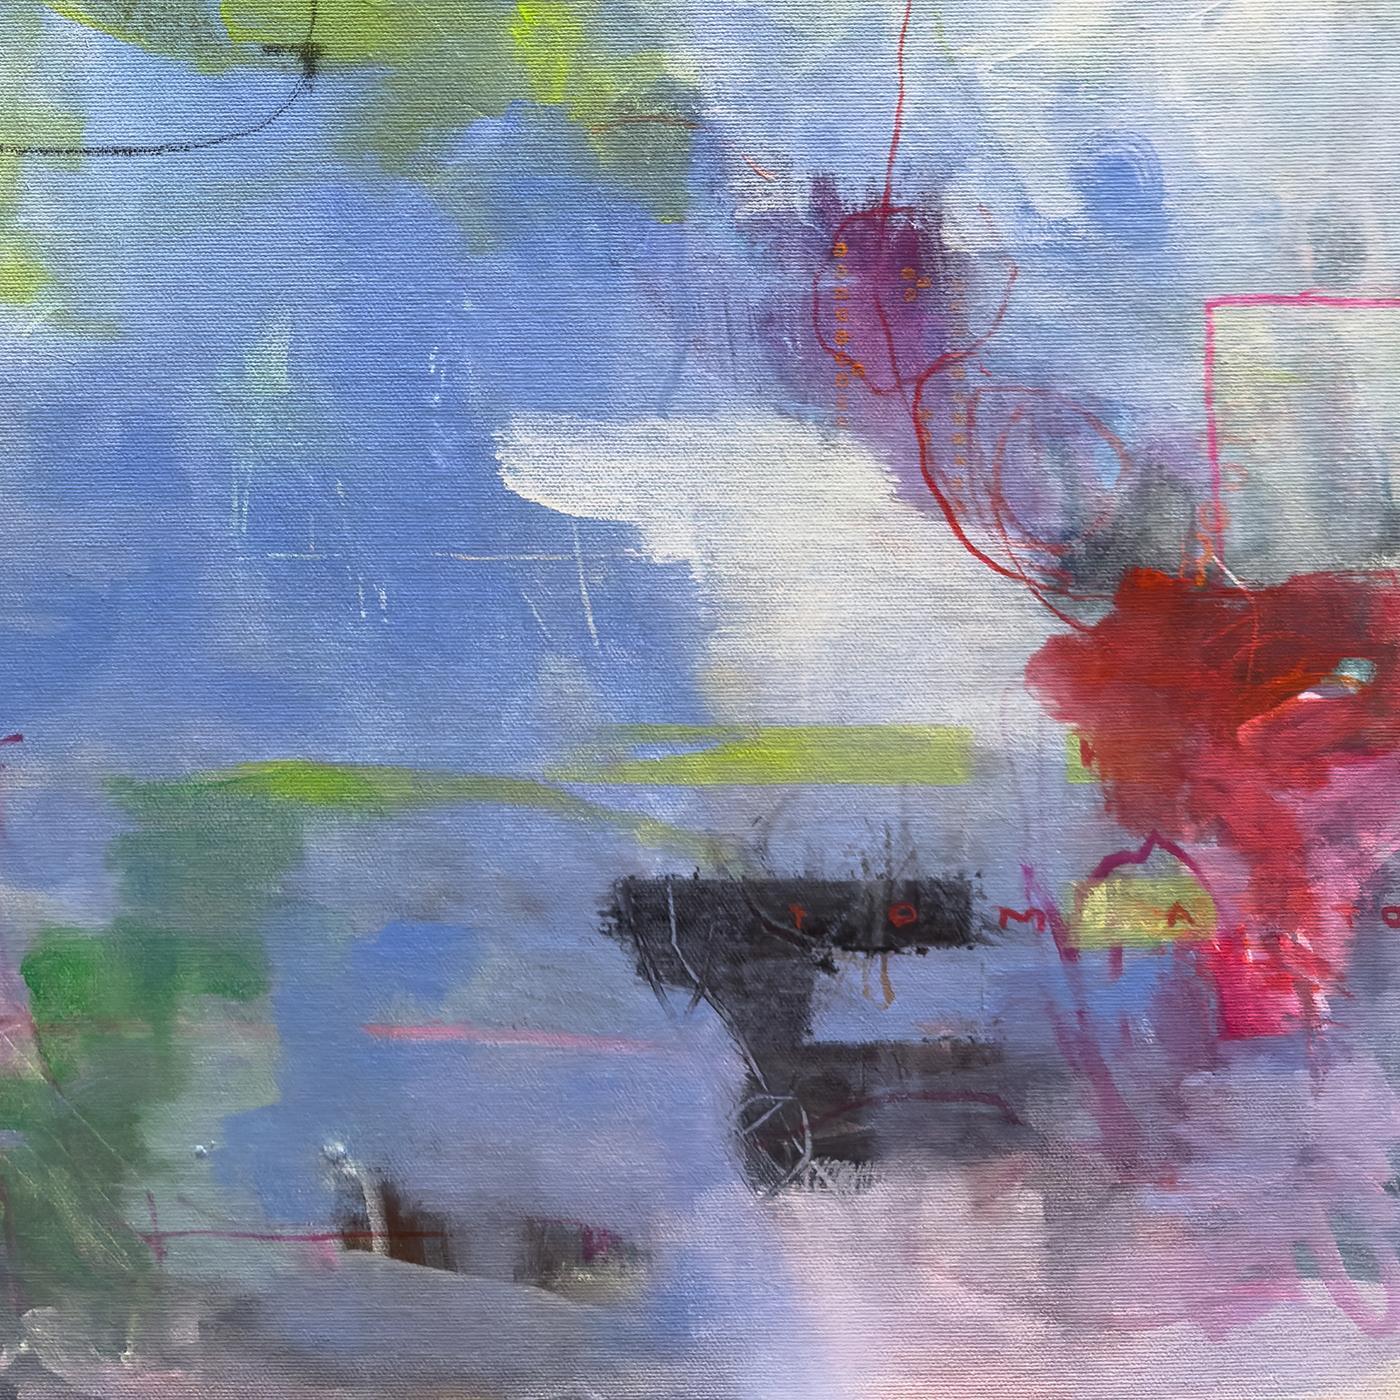 Sandra Cohen’s “Doomed Romantic” is a 30 x 24 x .25 inch abstract acrylic painting on canvas board, loosely painted in blue, green, black, pink, red, and white. Stormy shapes of black and green descend through areas of eroded and garbled text into a